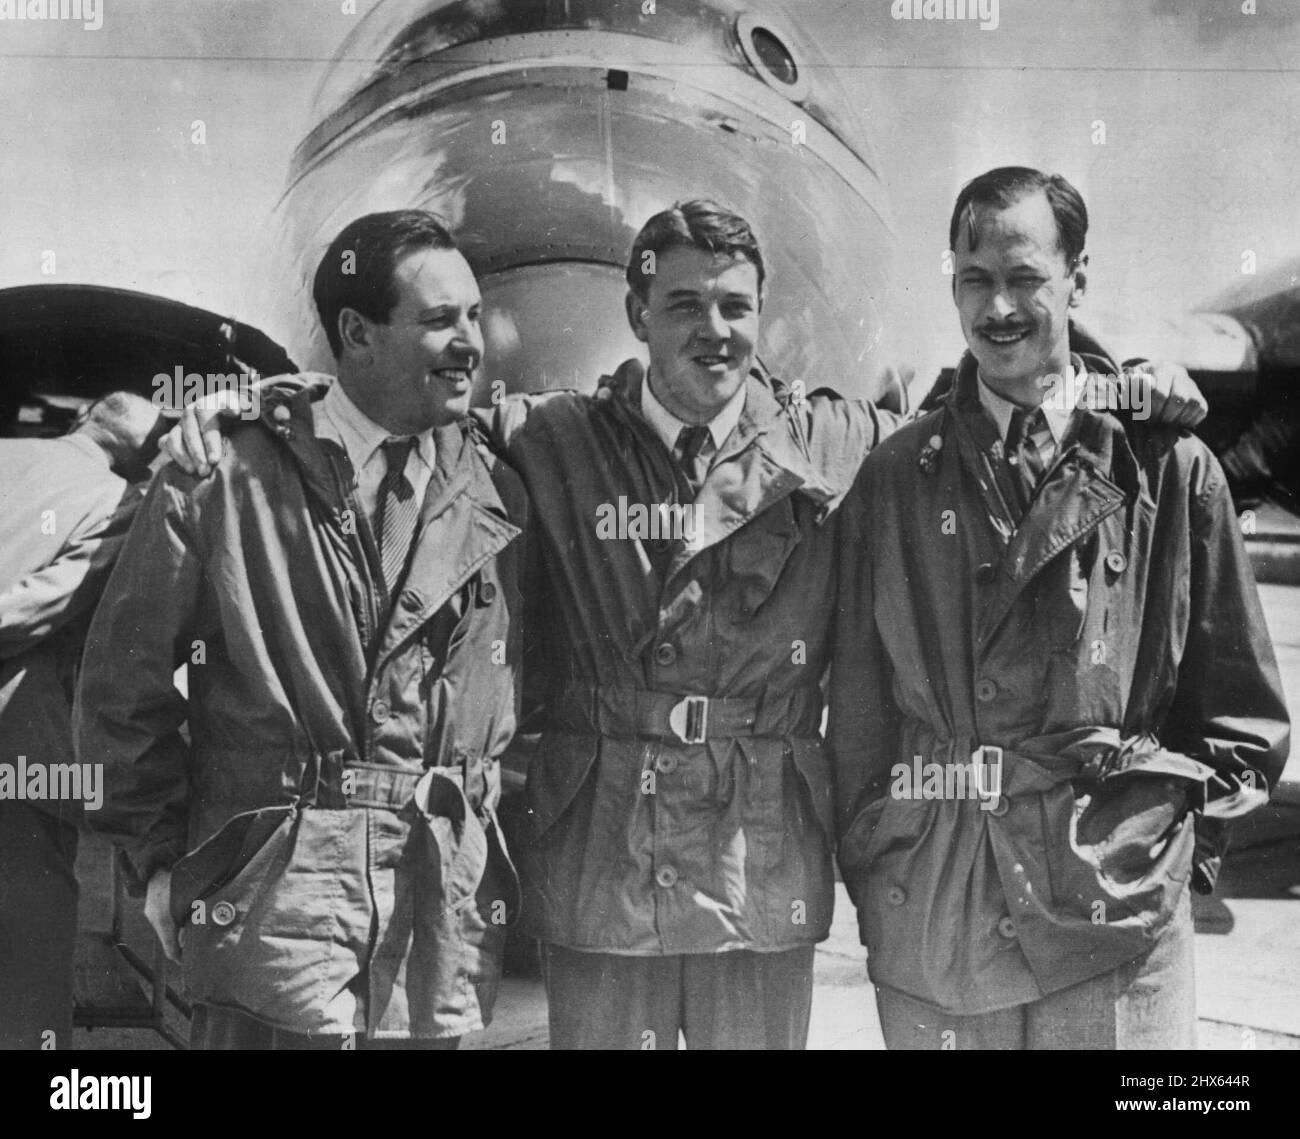 Crew Of Record Breaking Canberra -- The crew of the English Electric Canberra pose after Landing at the Olenn L. Martin plant here today. From left they are R.H. Rylands, R.P. Beamont, and D.A. Watson. The twin-jet Canberra Bomber set an East-West Atlantic crossing record last week. It made the 2,072.79-mile trip in four hours and 15 minutes. September 4, 1951. (Photo by AP Wirephoto). Stock Photo